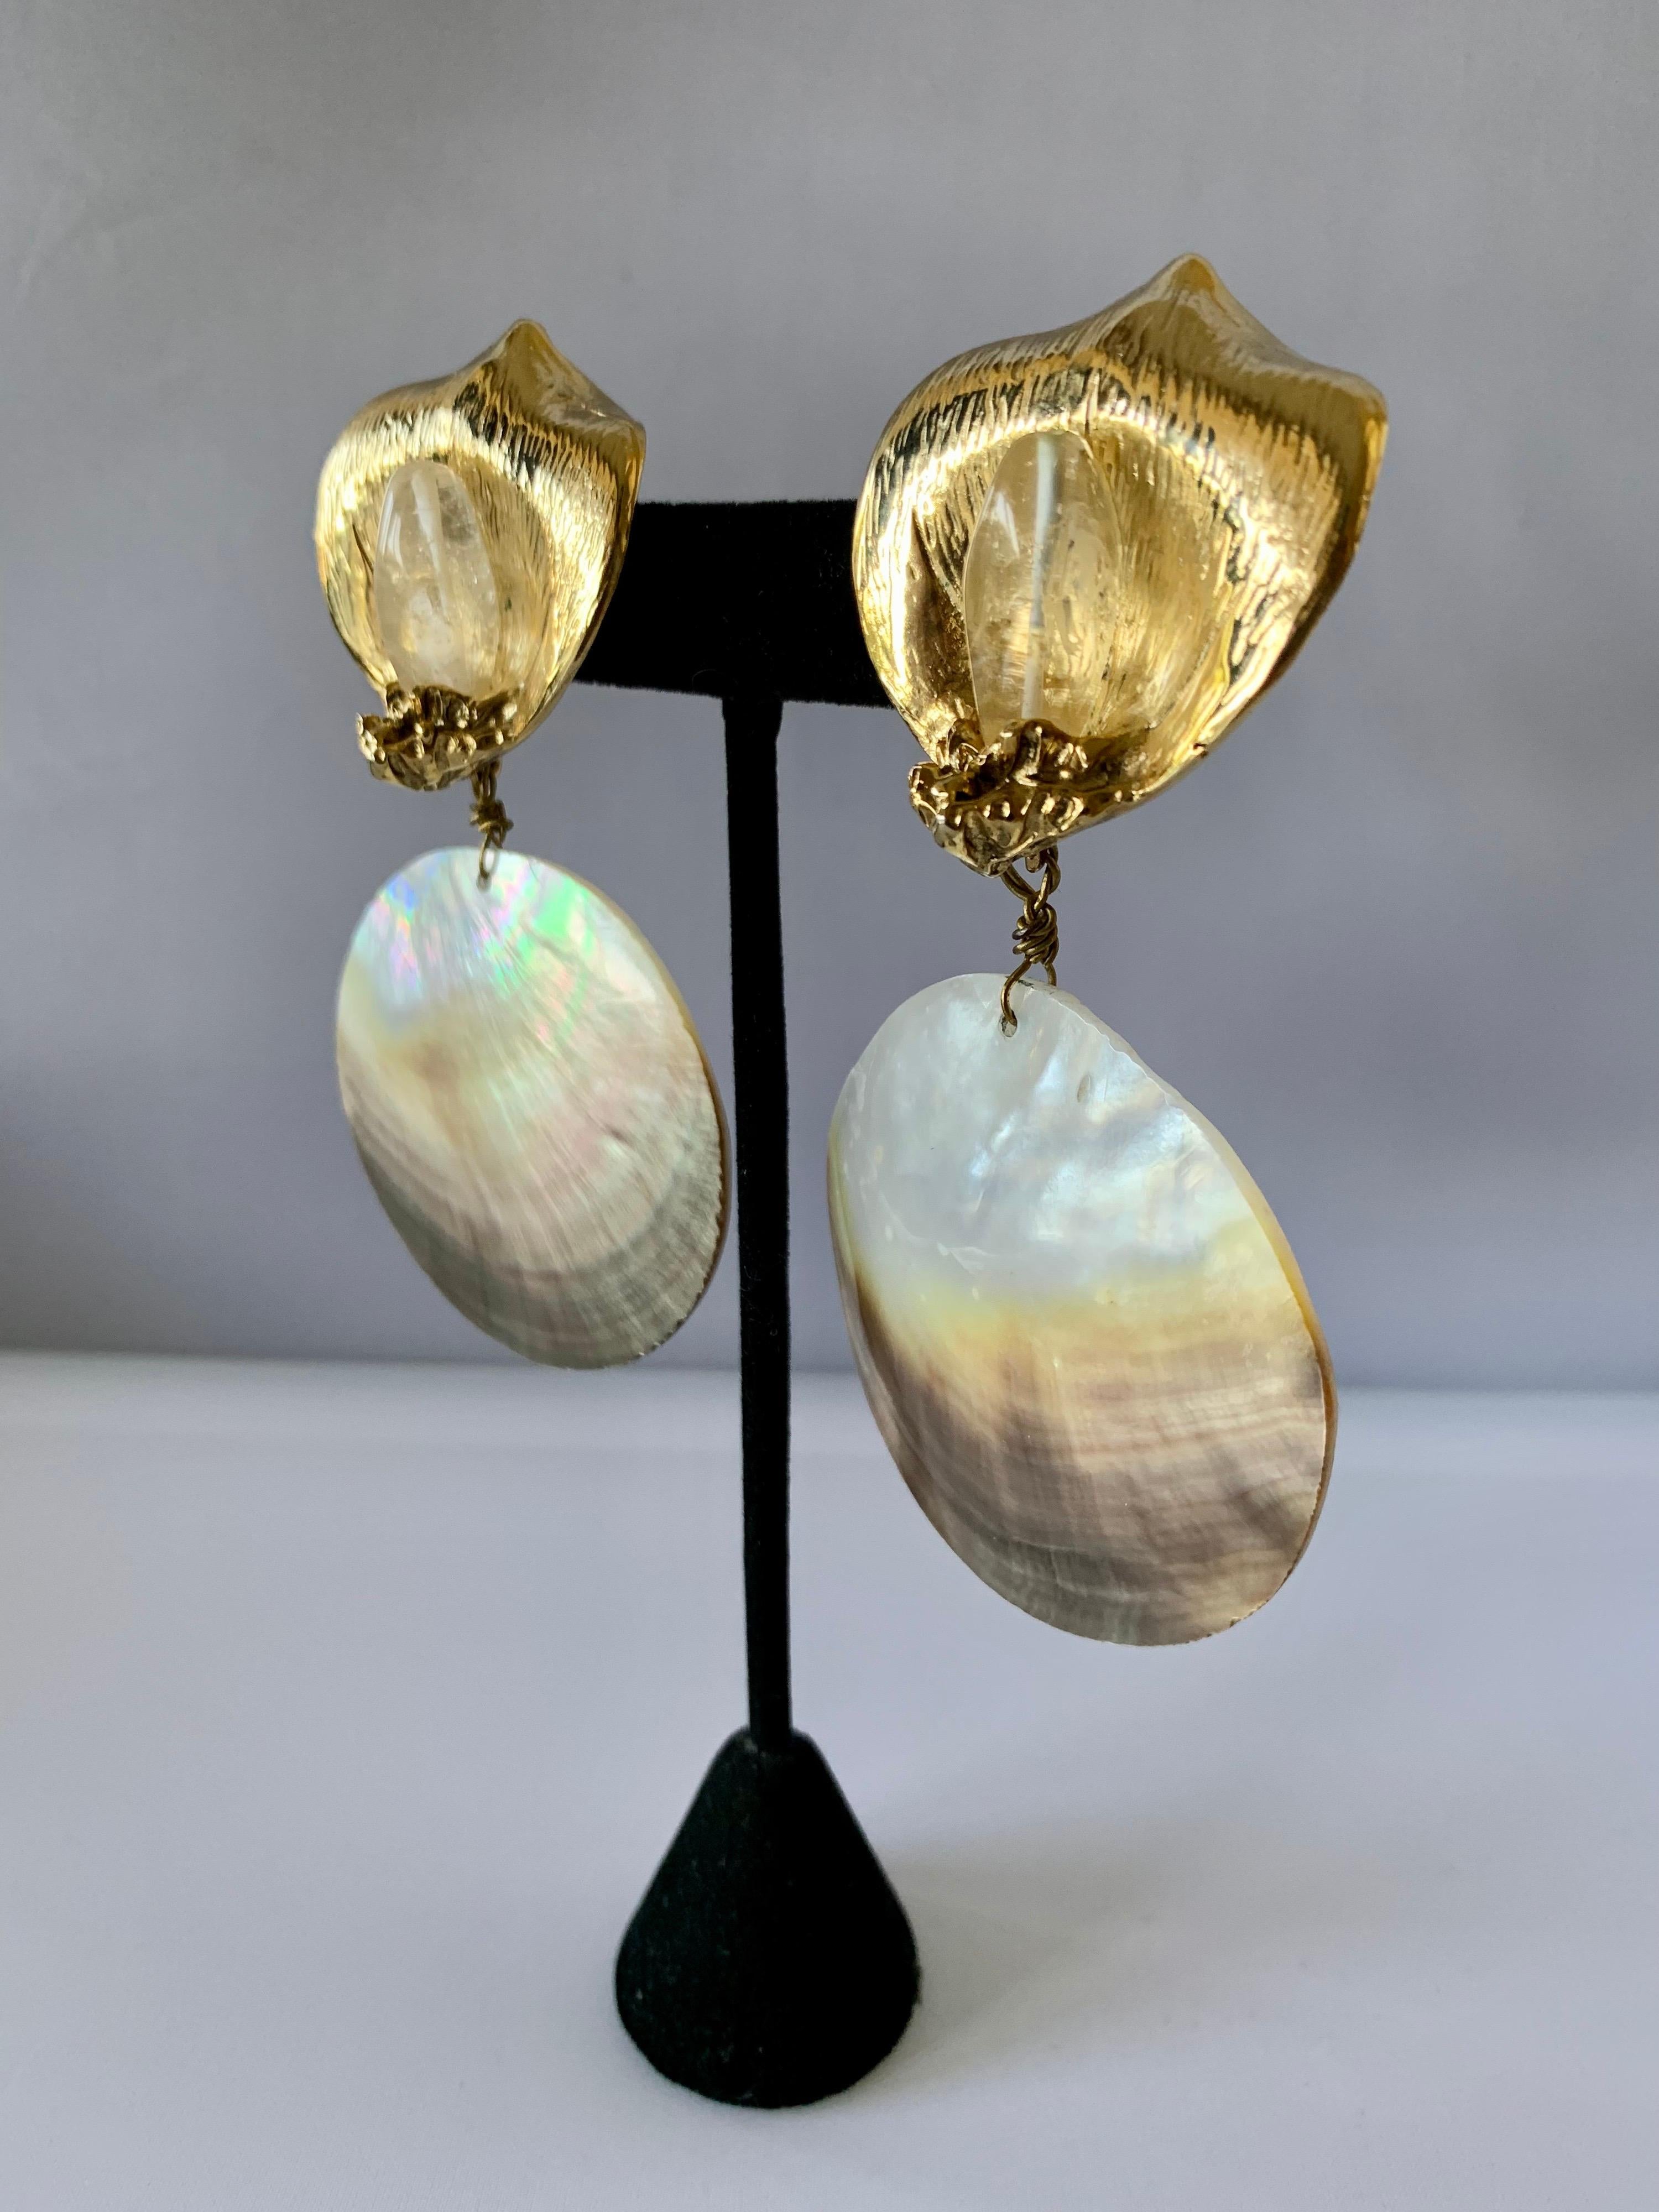 Spectacular artisan large French statement clip-on earrings featuring large bronze gilded calla lily's which are accented by polished rock crystal elements and seashells. 

note: The earrings are lightweight and comfortable to wear.